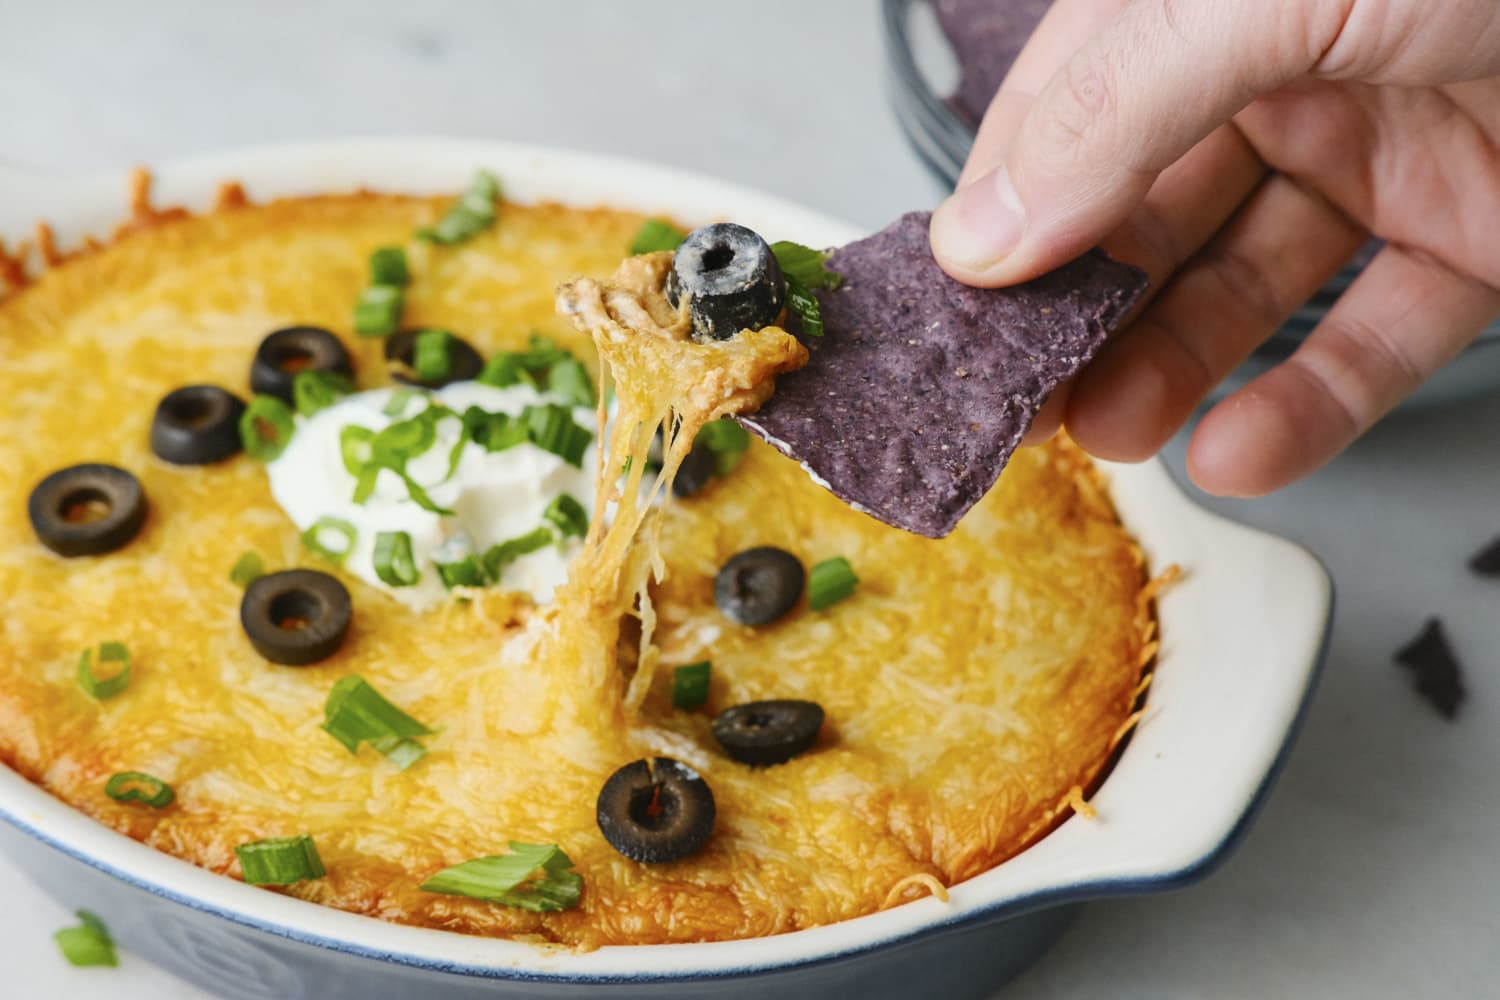 I Tried “Texas Trash Dip” and It’s So Easy I’m Definitely Making It for My Super Bowl Party